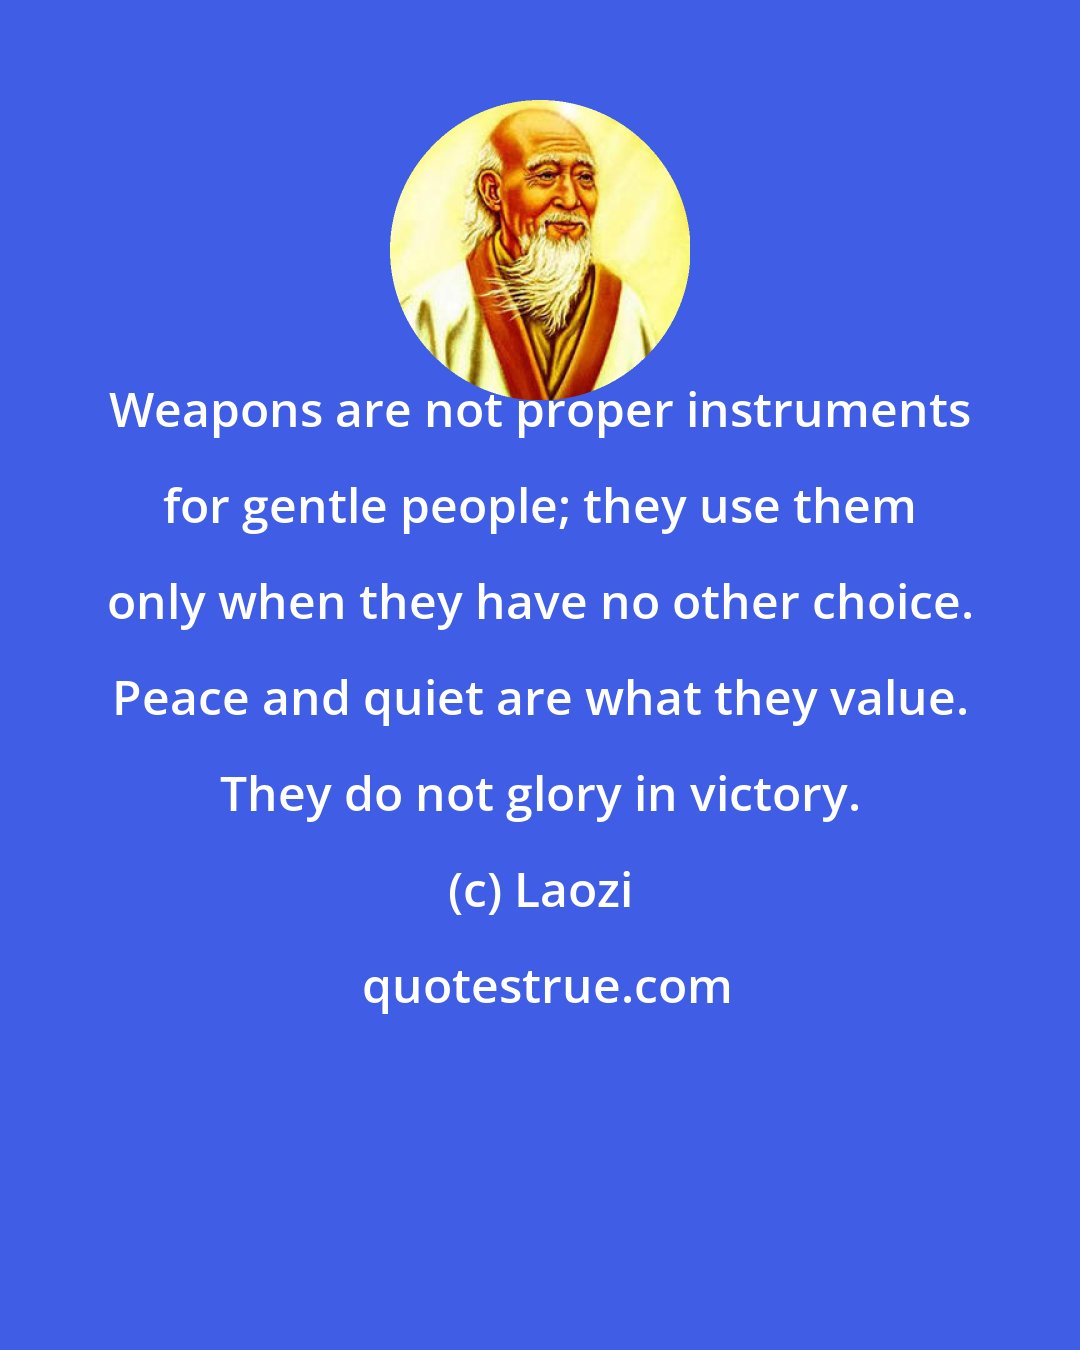 Laozi: Weapons are not proper instruments for gentle people; they use them only when they have no other choice. Peace and quiet are what they value. They do not glory in victory.